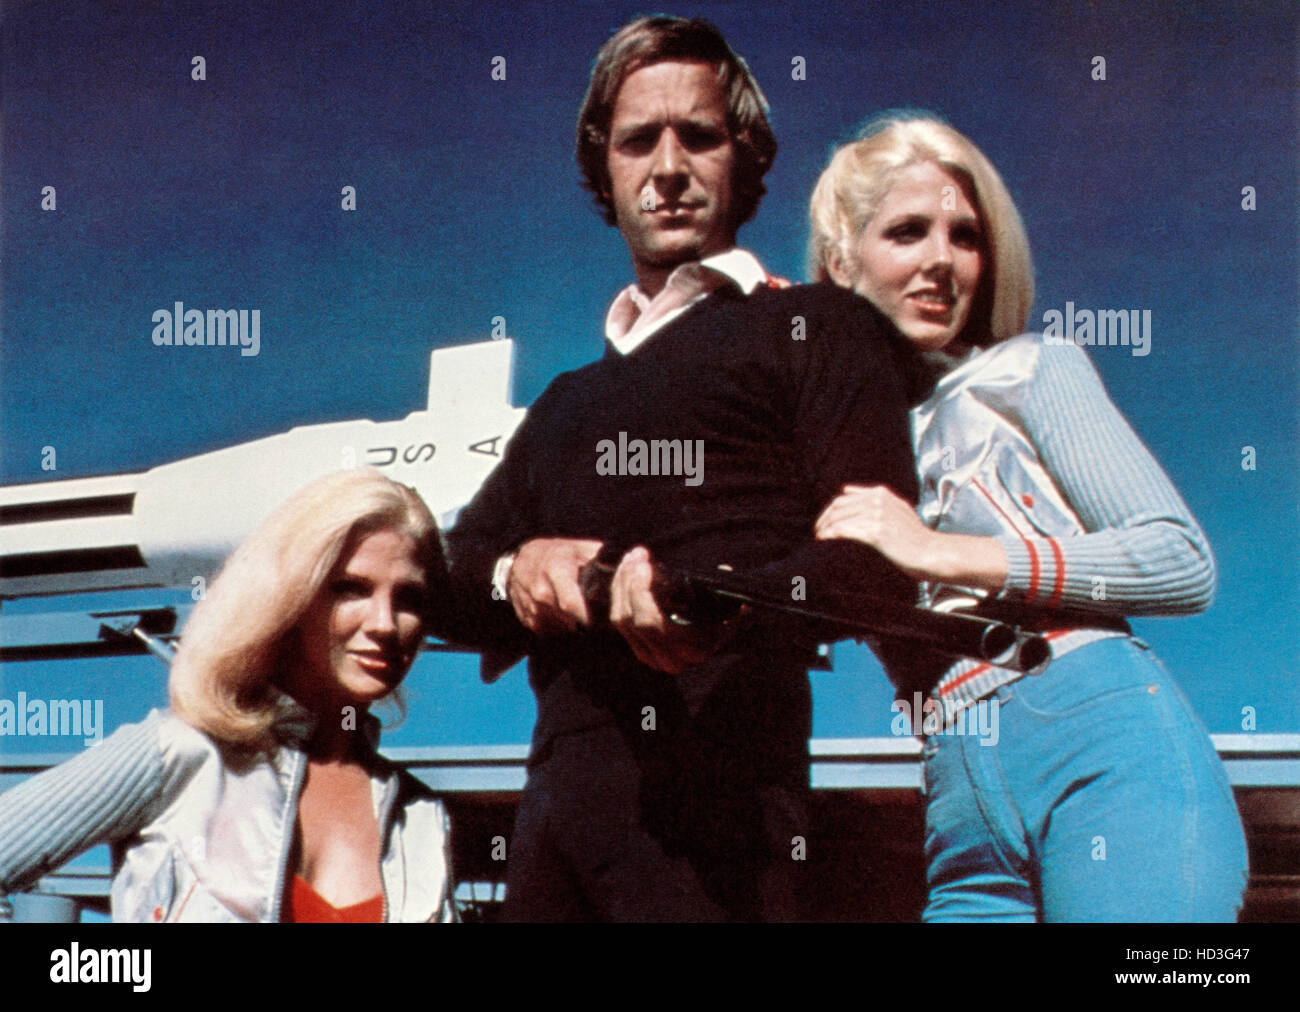 THE BILLION DOLLAR THREAT, from left: Beth Specht, Dale Robinette, Karen  Specht, 1979. ©Columbia Pictures Television/courtesy Stock Photo - Alamy